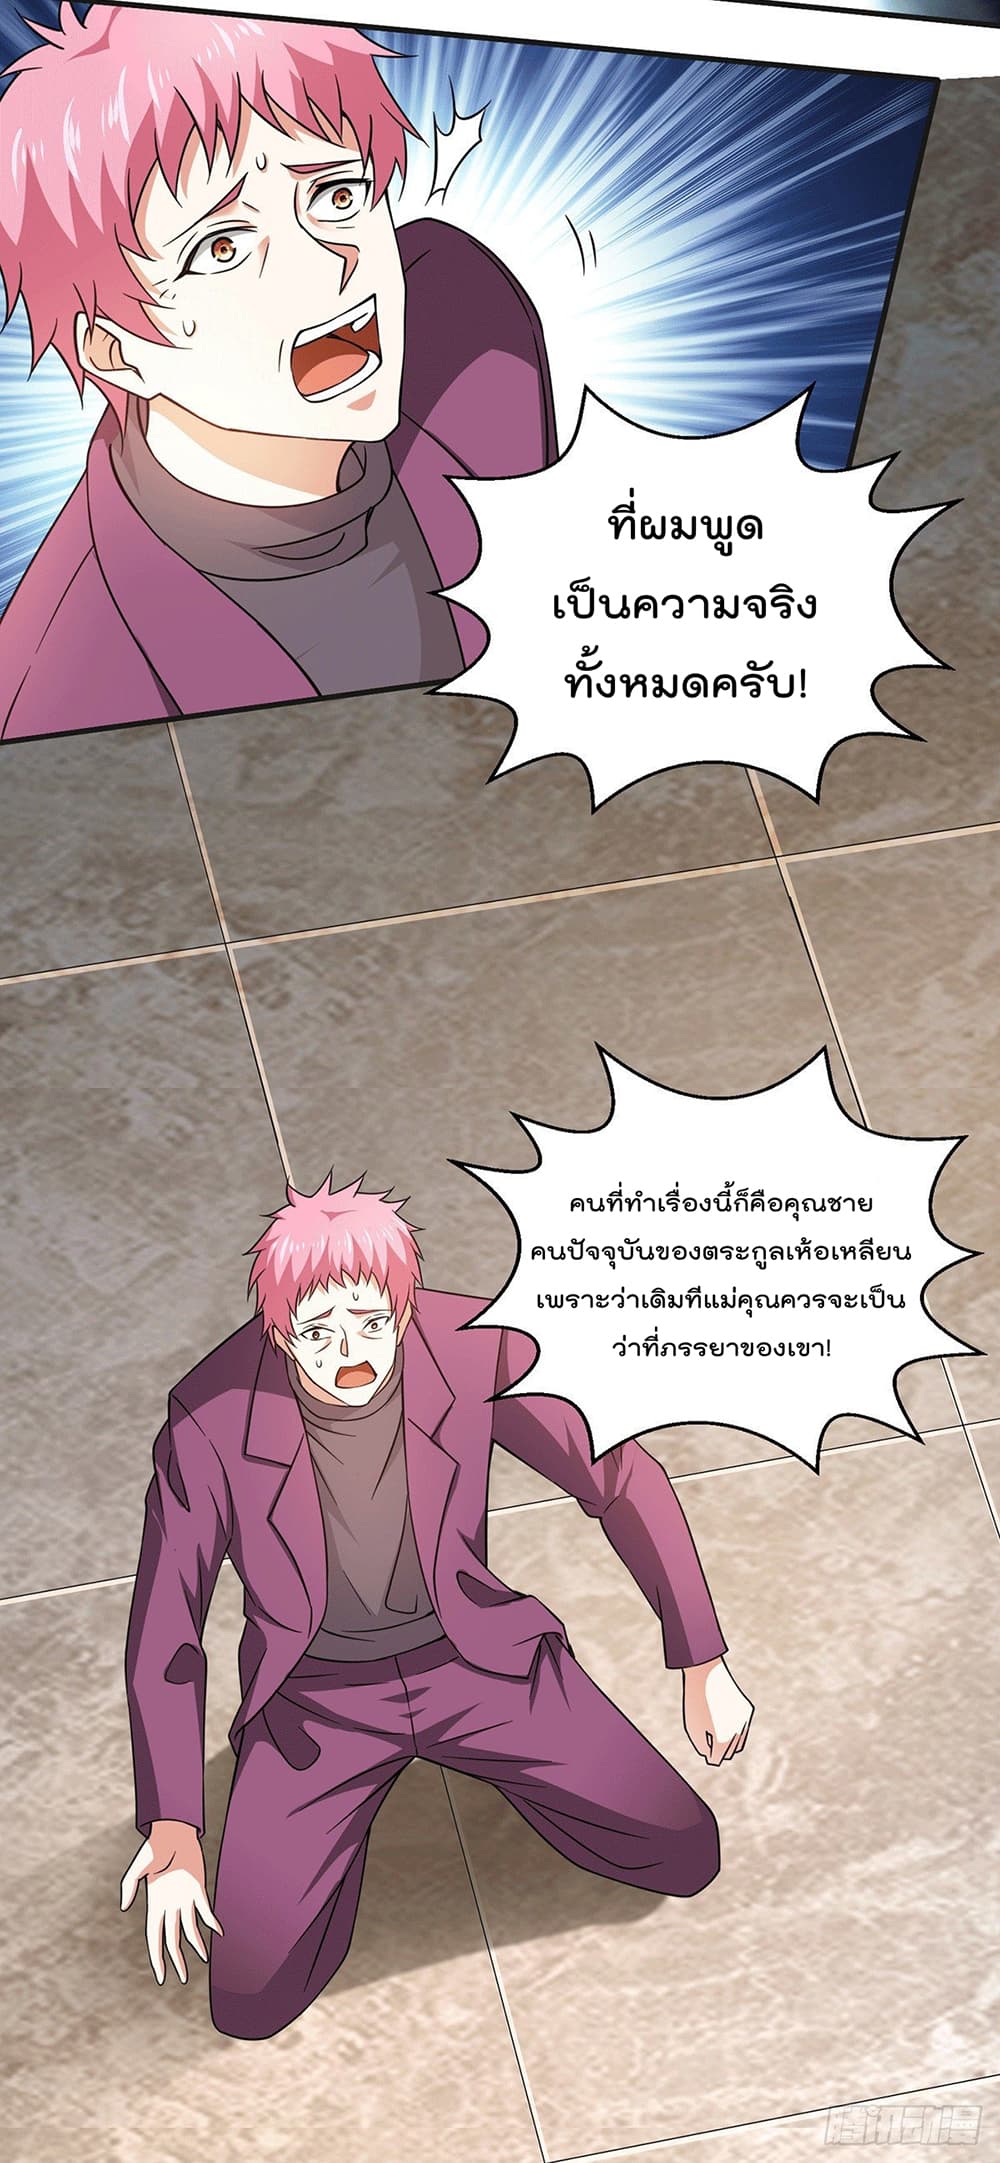 God Dragon of War in The City 49 (6)